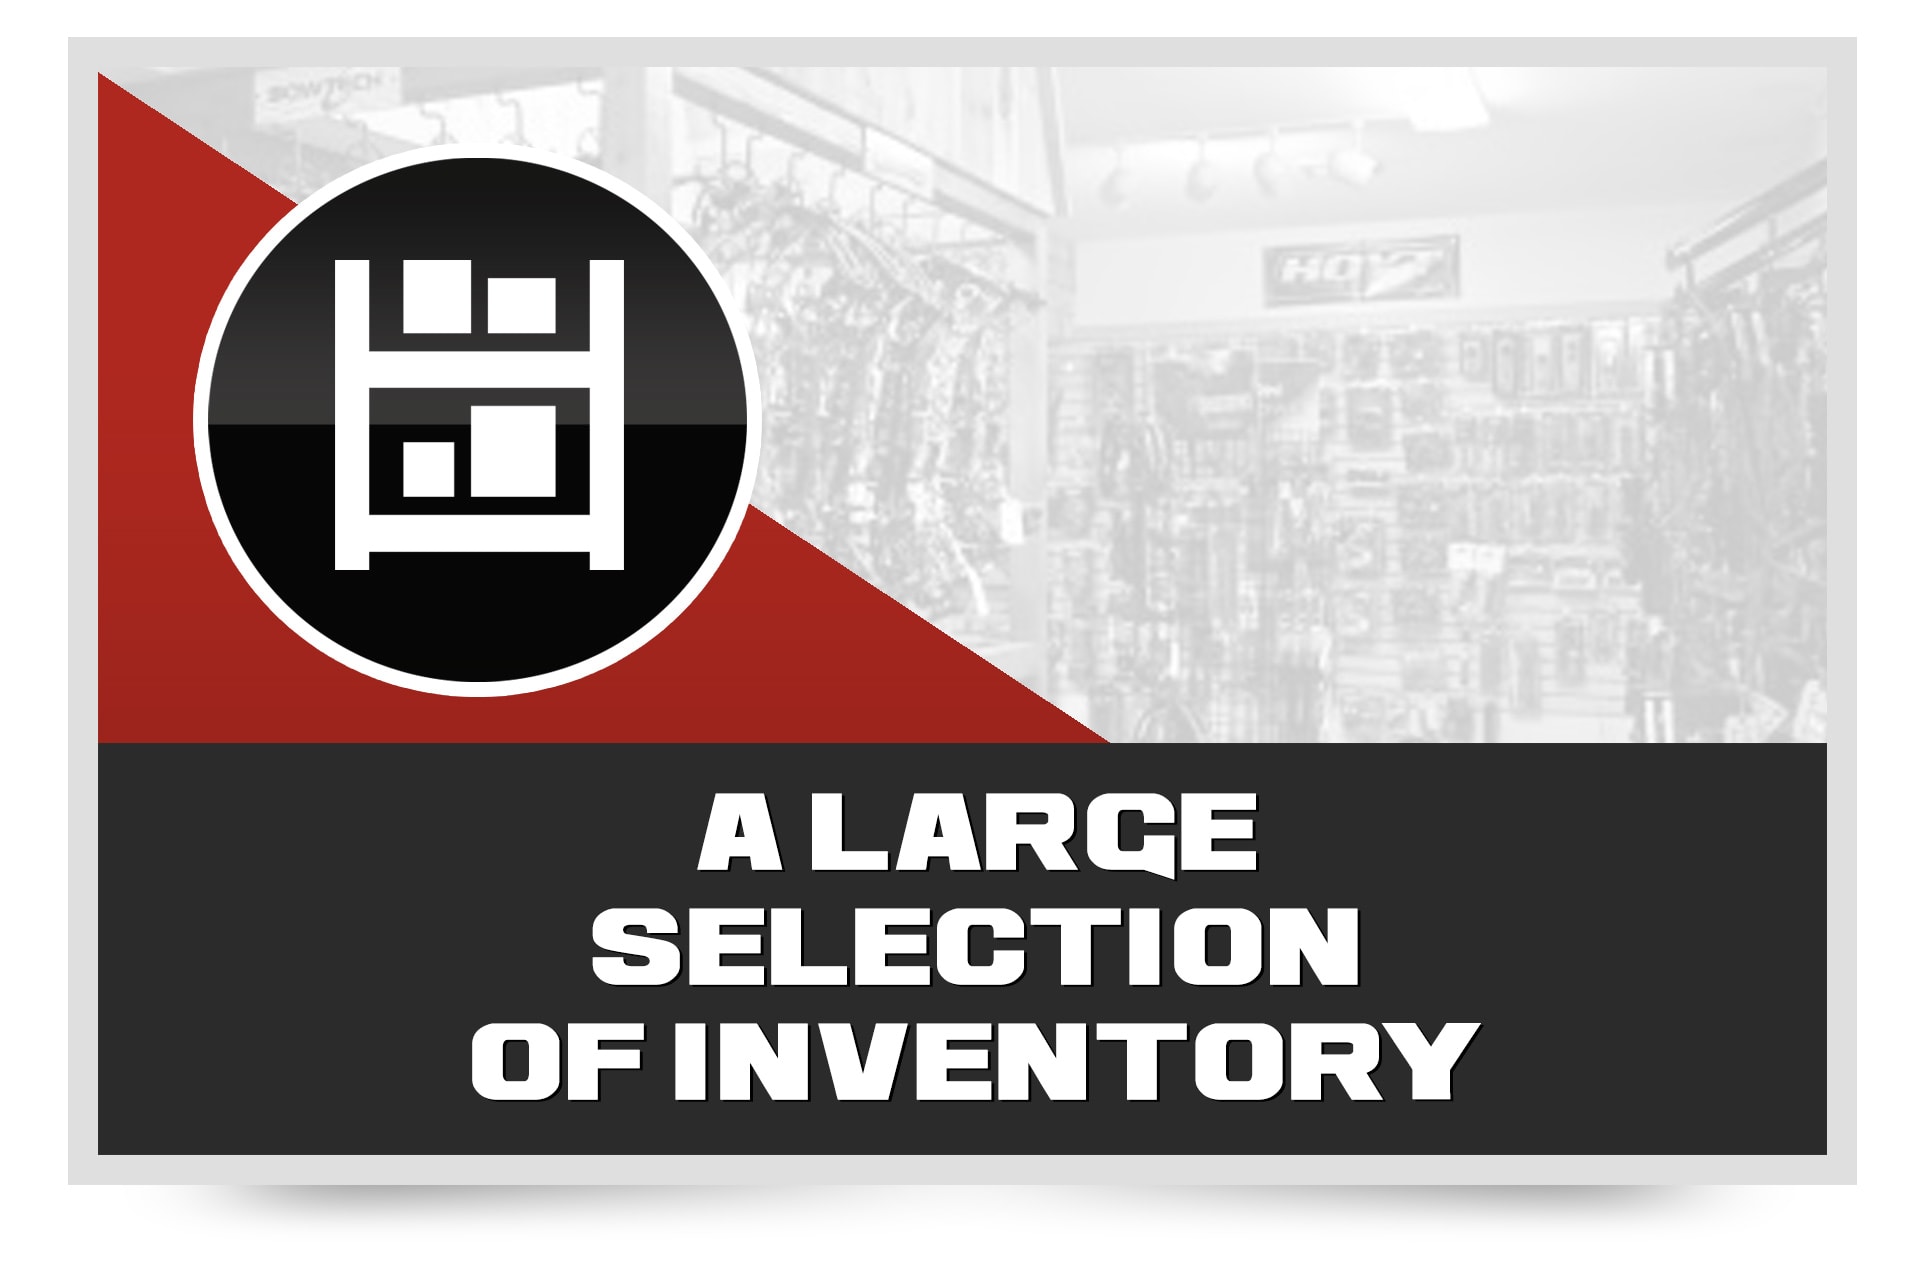 a large selection of inventory